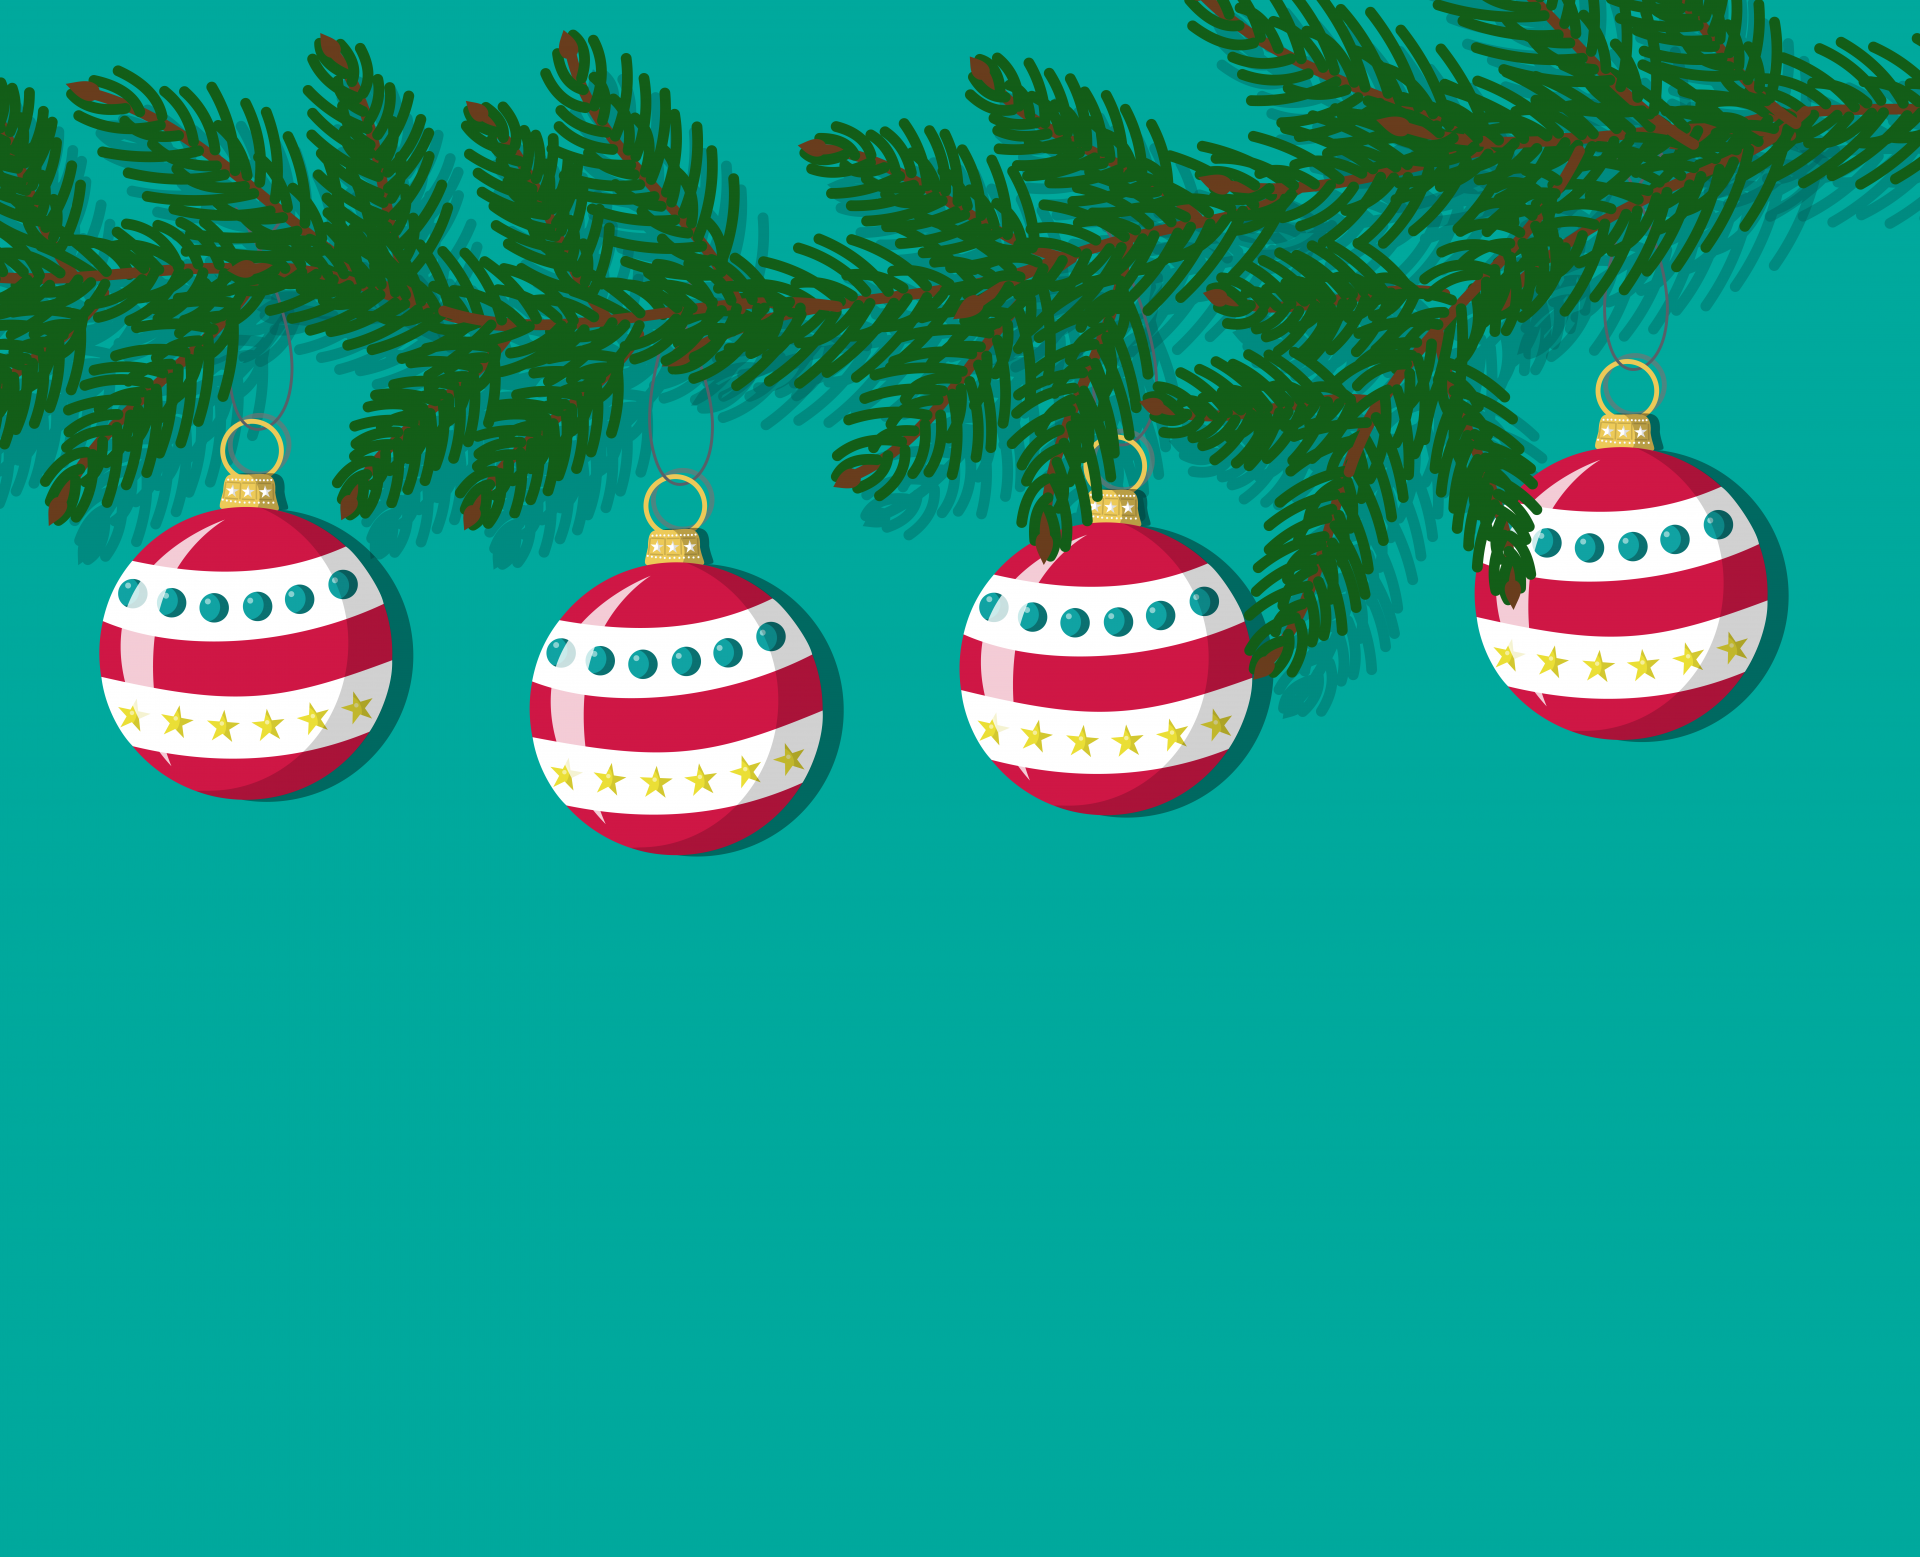 Christmas balls hanging on a tree branch illustration on blue background